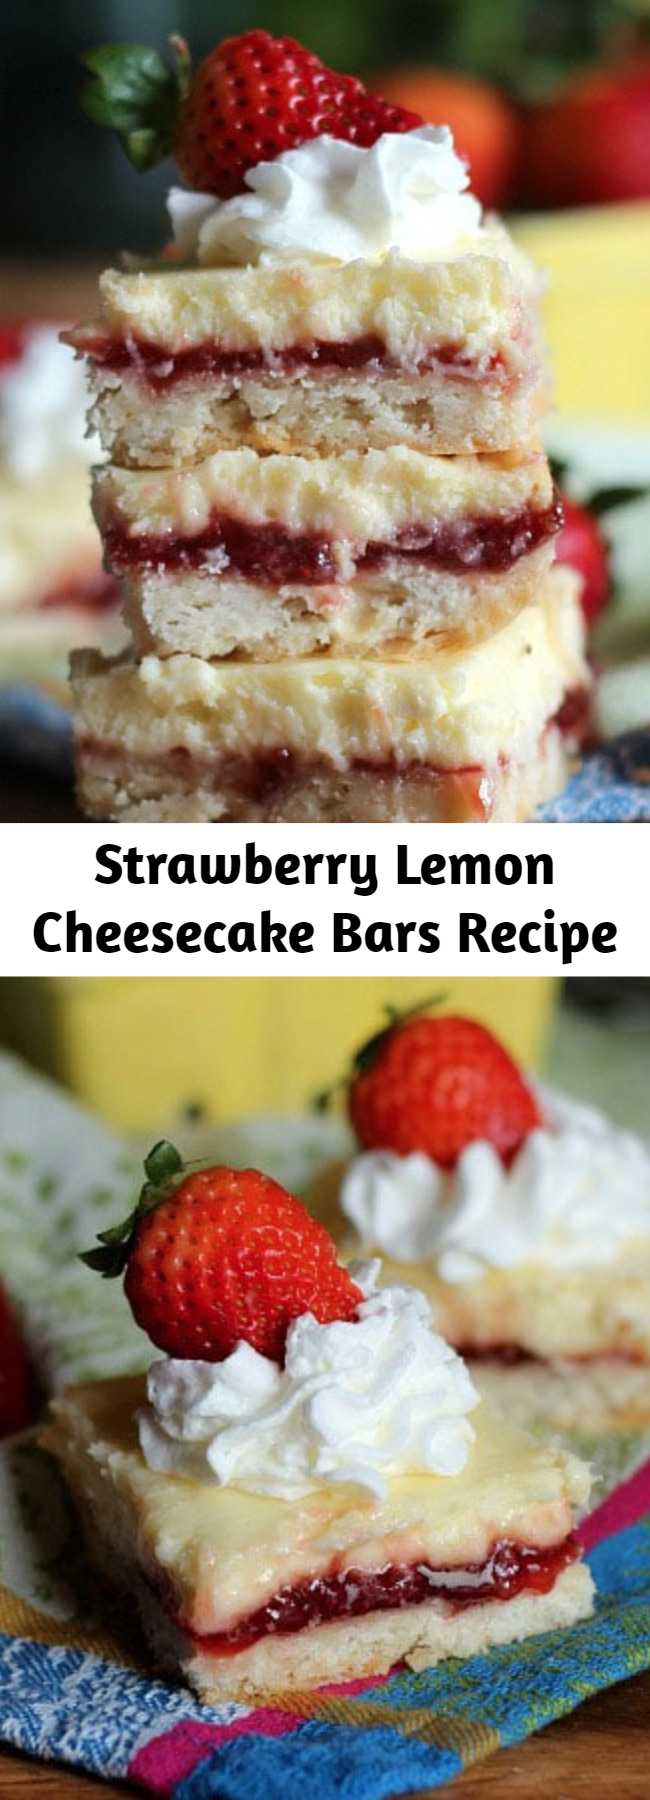 Strawberry Lemon Cheesecake Bars Recipe - Thick buttery graham cracker crust topped with lemon strawberry-swirled filling to make these delicious Strawberry Lemon Cheesecake Bars! Chill them for a tasty summer dessert!